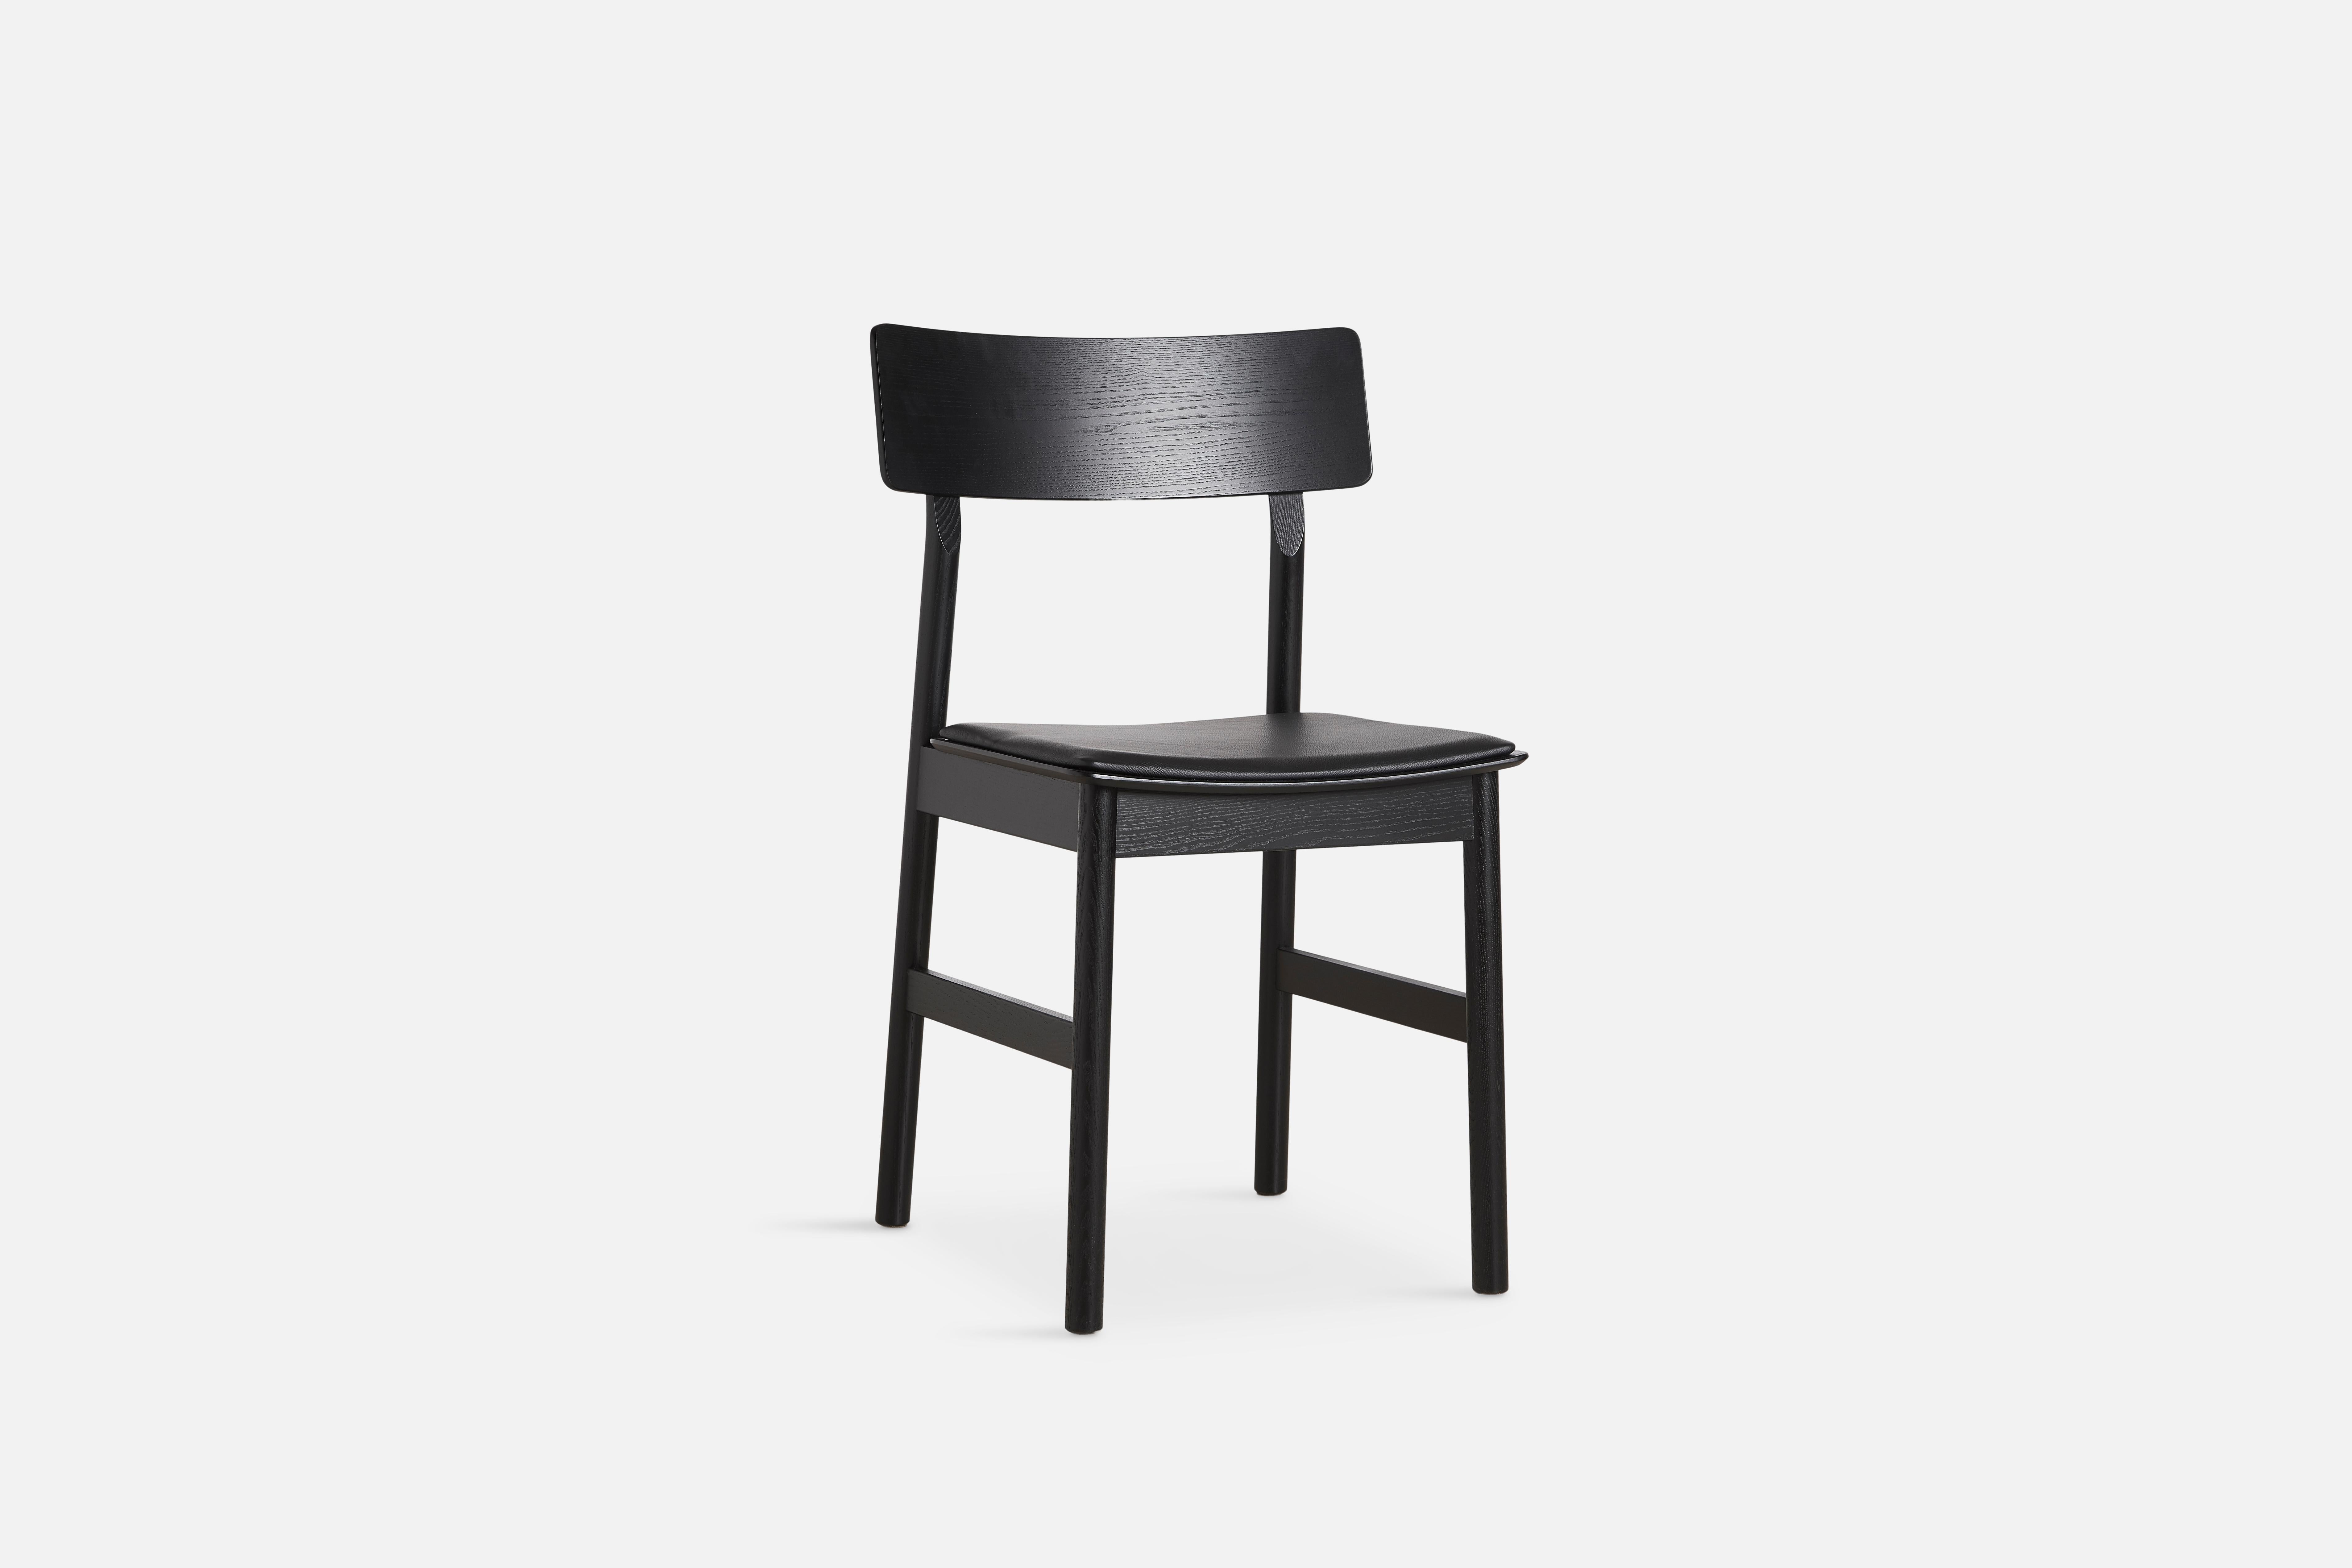 Pause black dining chair 2.0 with leather seat by Kasper Nyman
Materials: ash, plywood, leather, upholstery 
Dimensions: D 47 x W 48 x H 80 cm
Also available in different colors and finishes. 

The founders, Mia and Torben Koed, decided to put